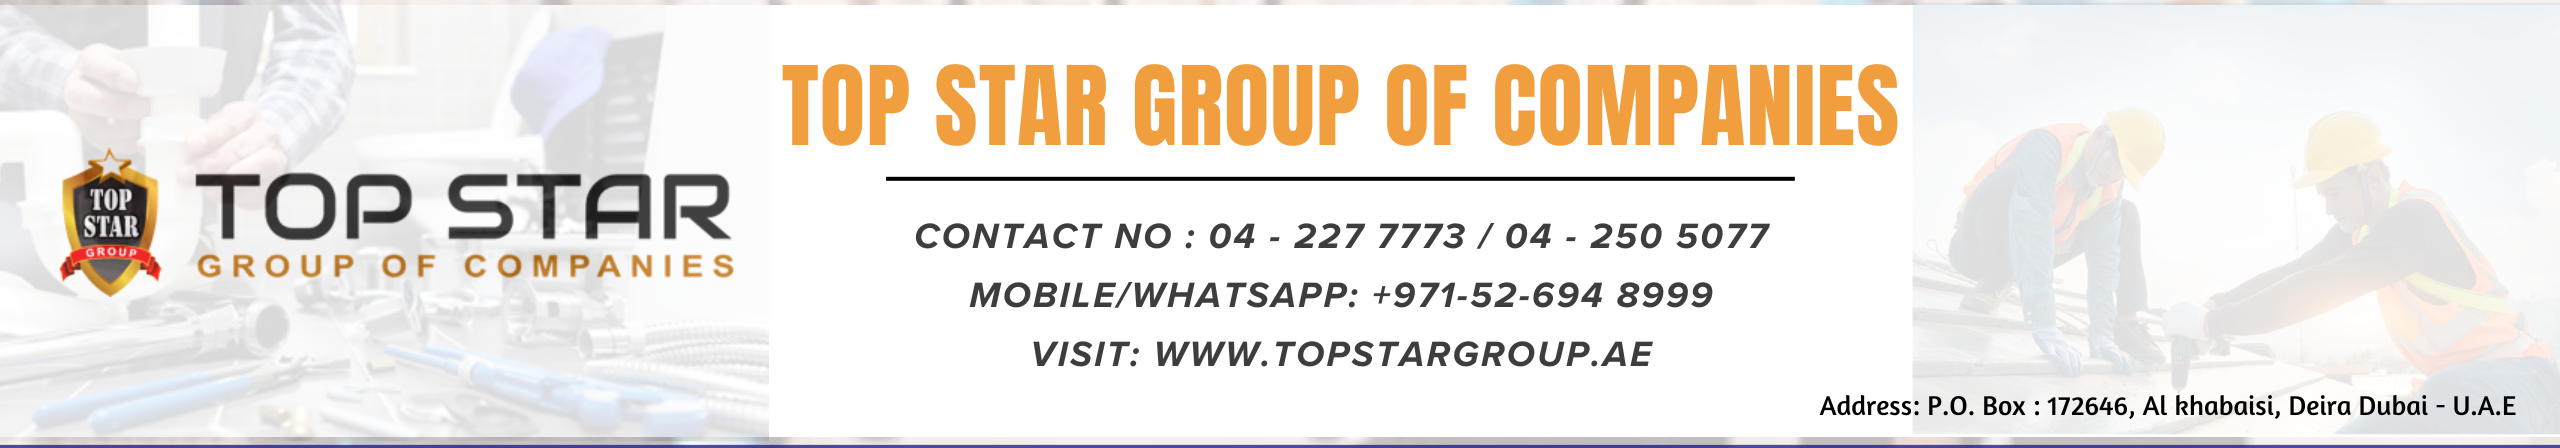 Top Star Group f Companies's profile banner